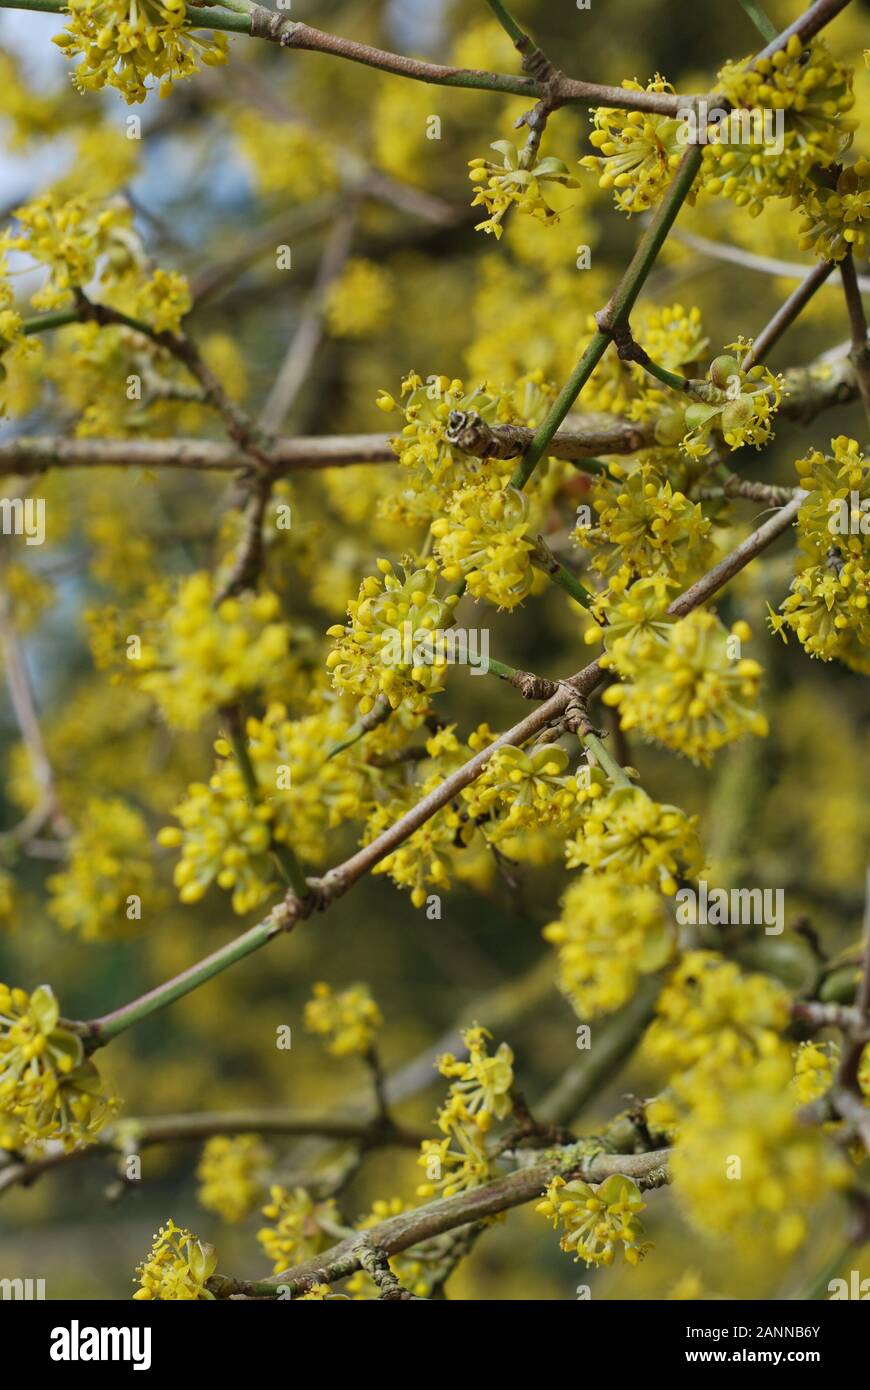 Yellow blossom background image in close-up with branches Stock Photo